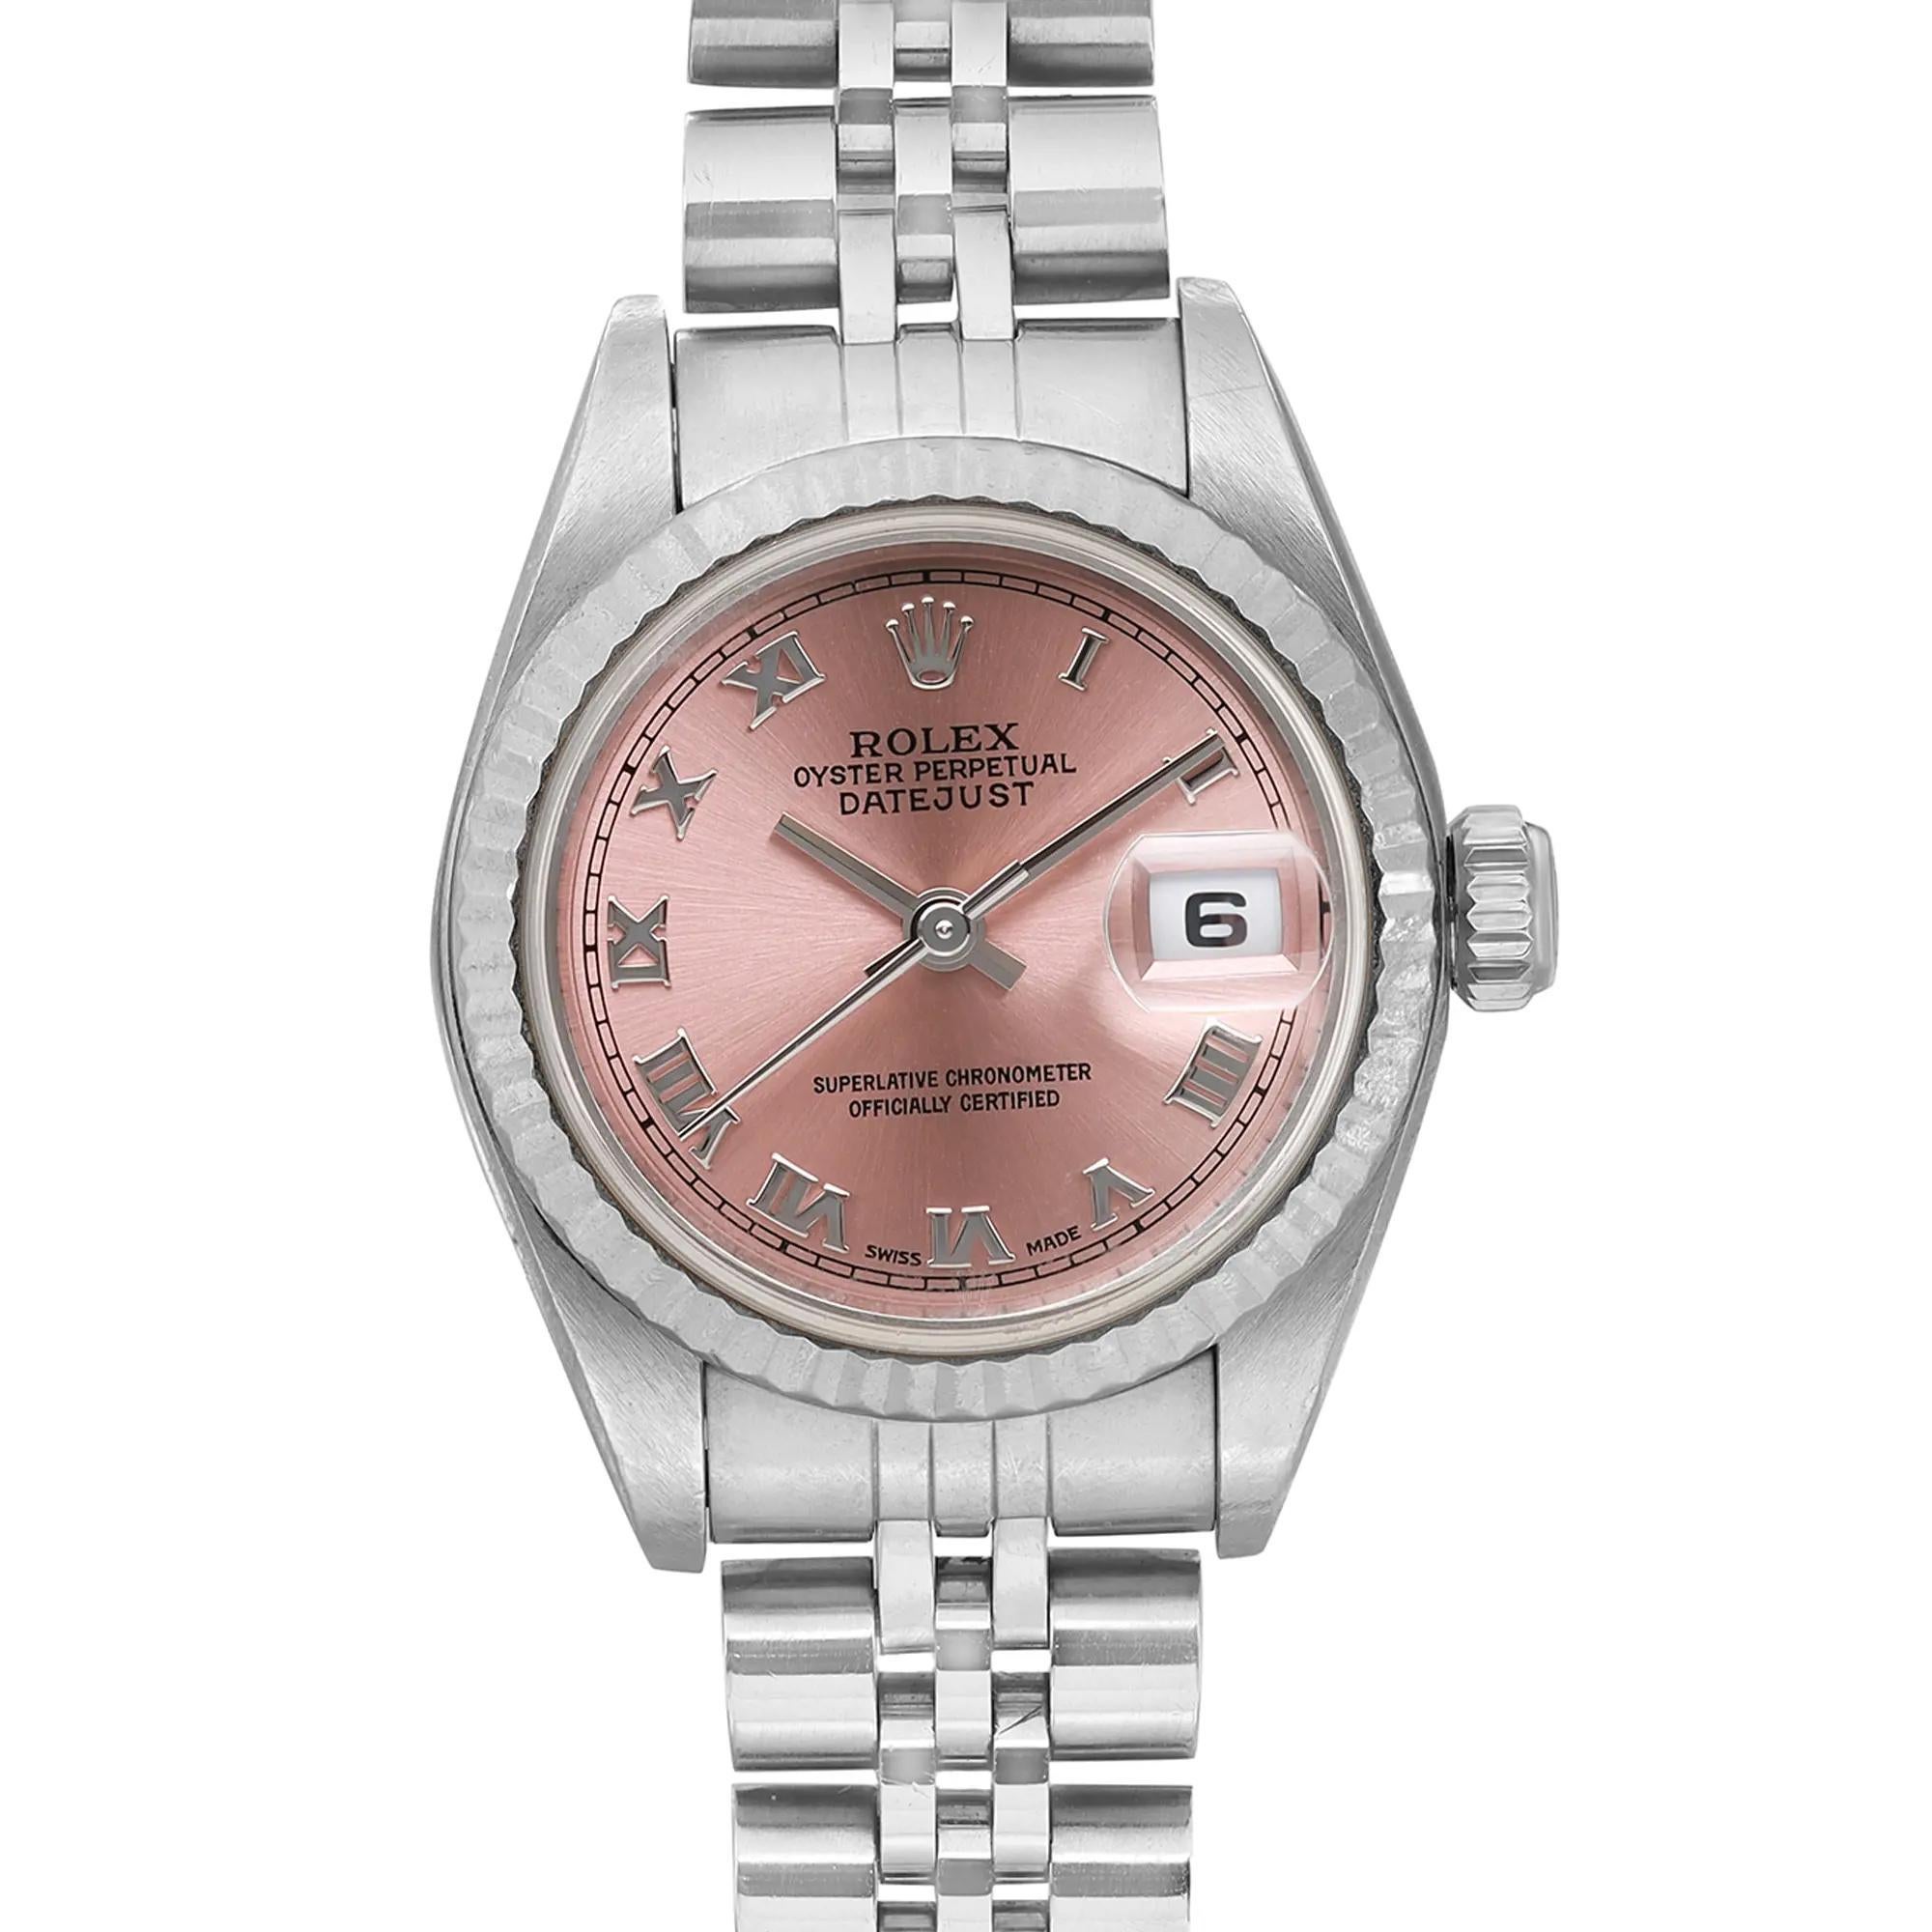 The watch was produced in 2004. No holes case. Minor nicks and scratches on the case and bracelet. Minor slack on the band. The original box and papers are included. 

Brand: Rolex  Type: Wristwatch  Department: Women  Model Number: 79174 